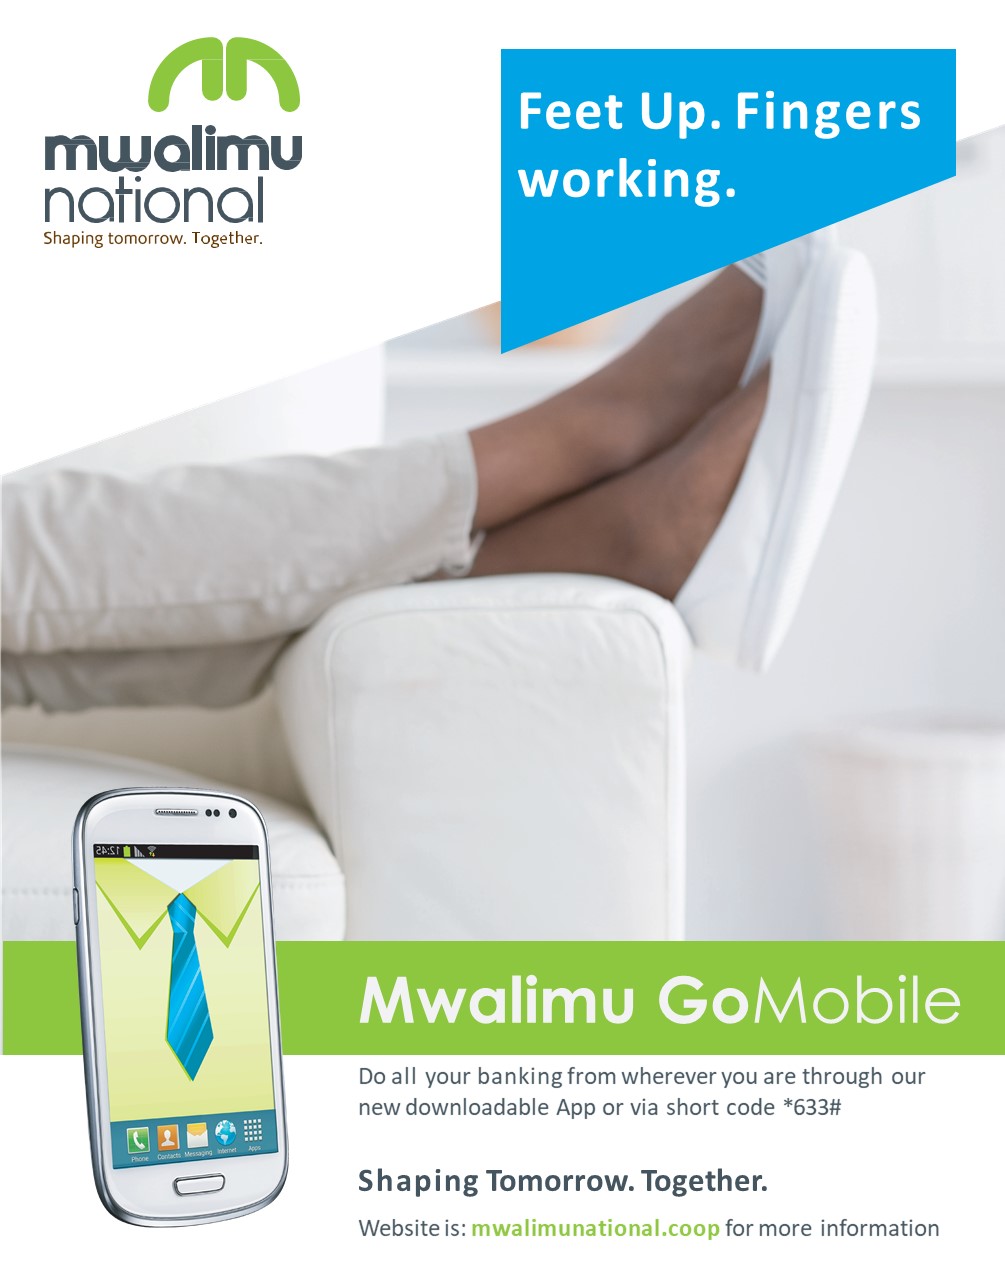 Go Mobile Full page ad1